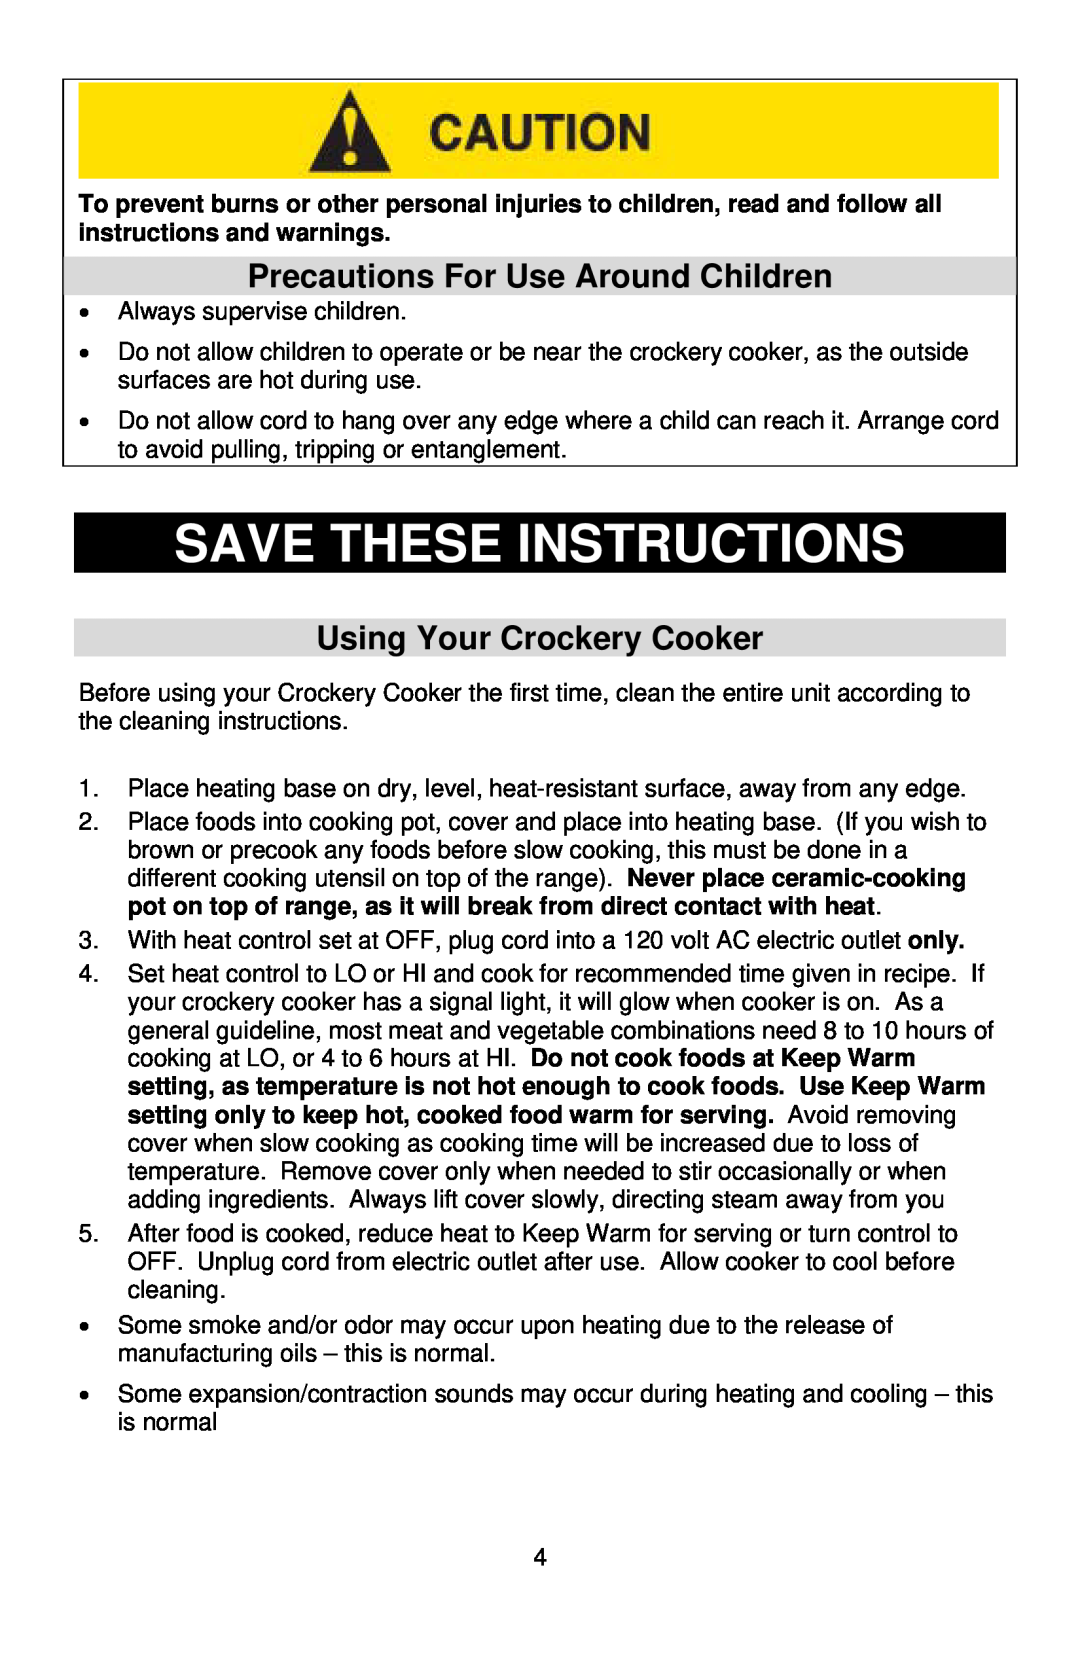 West Bend instruction manual Save These Instructions, Precautions For Use Around Children, Using Your Crockery Cooker 